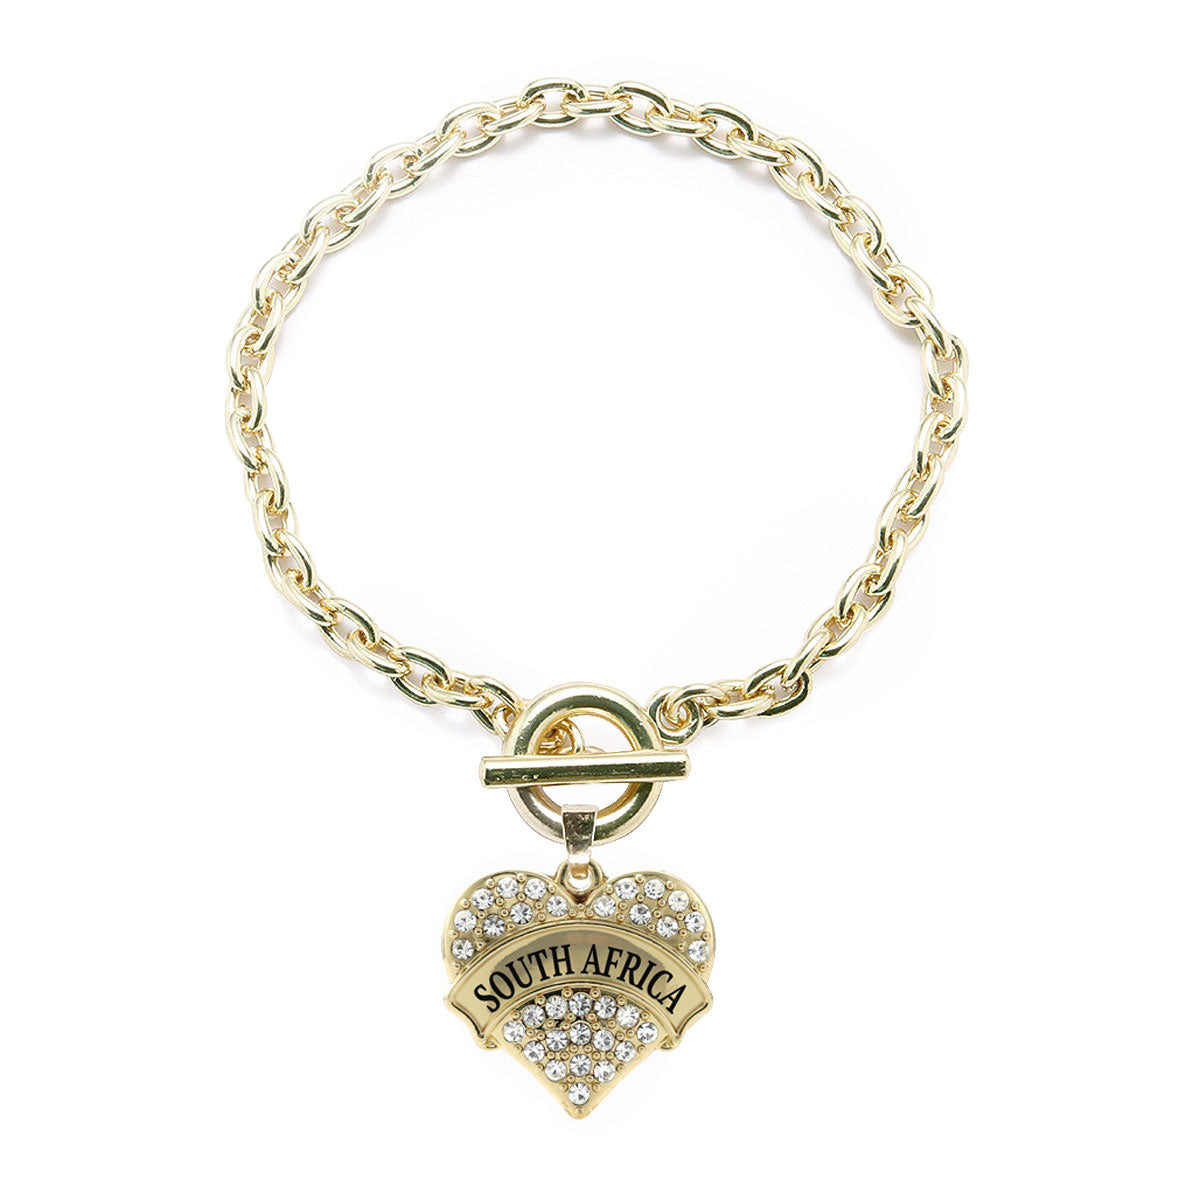 Gold South Africa Pave Heart Charm Toggle Bracelet